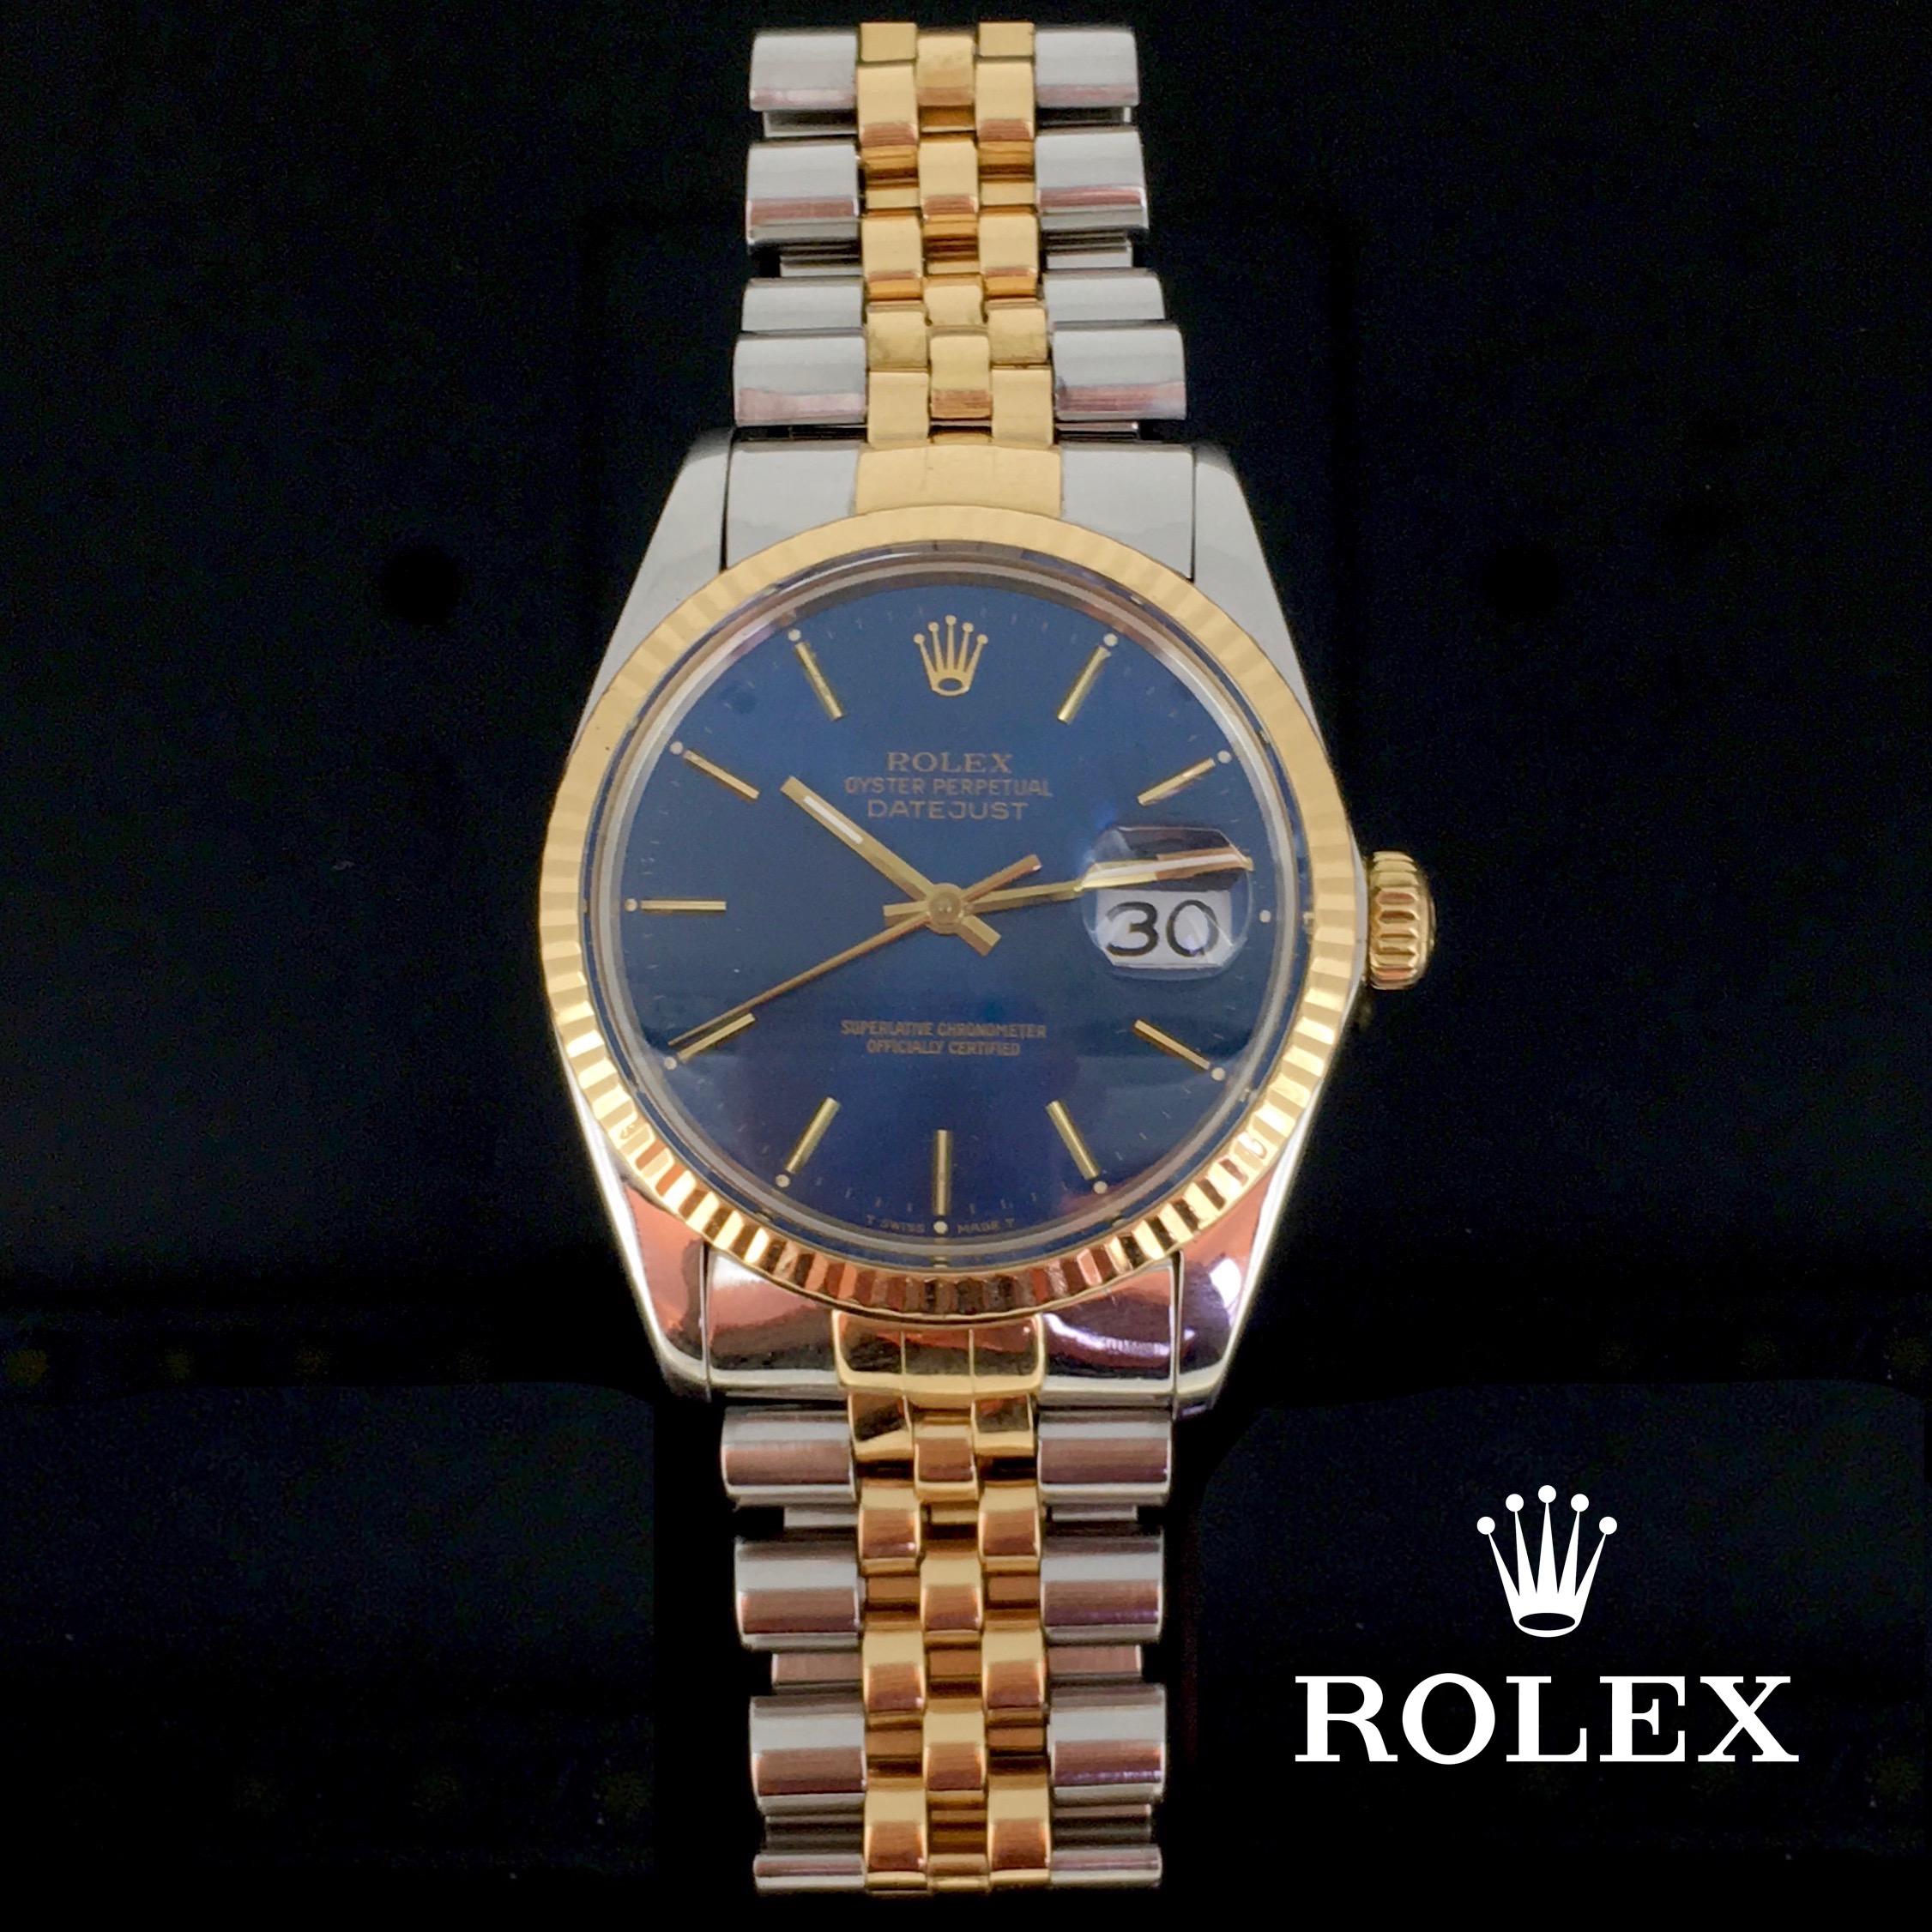 This Rolex Oyster Datejust 16000 watch is made  in 18K yellow gold and stainless steel. It is in excellent condition and works perfectly as it was fully restored. It comes with its original papers and box.

Total Weight:	92.0 g

Metal:		18K yellow